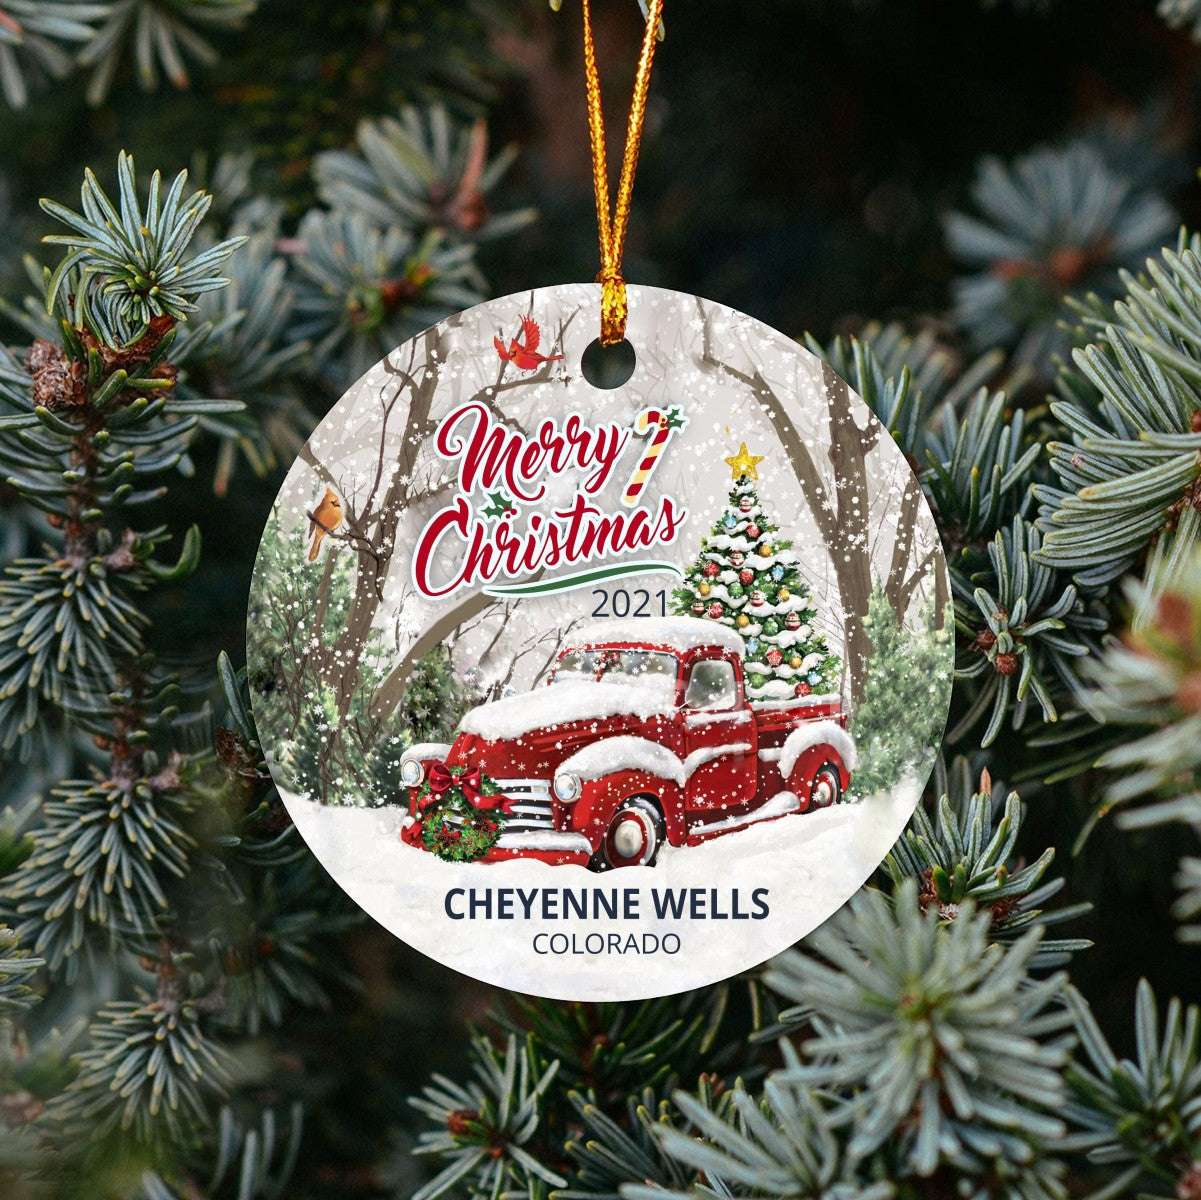 Christmas Tree Ornaments Cheyenne Wells - Ornament With Name City, State Cheyenne Wells Colorado CO Ornament - Red Truck Xmas Ornaments 3'' Plastic Gift For Family, Friend And Housewarming